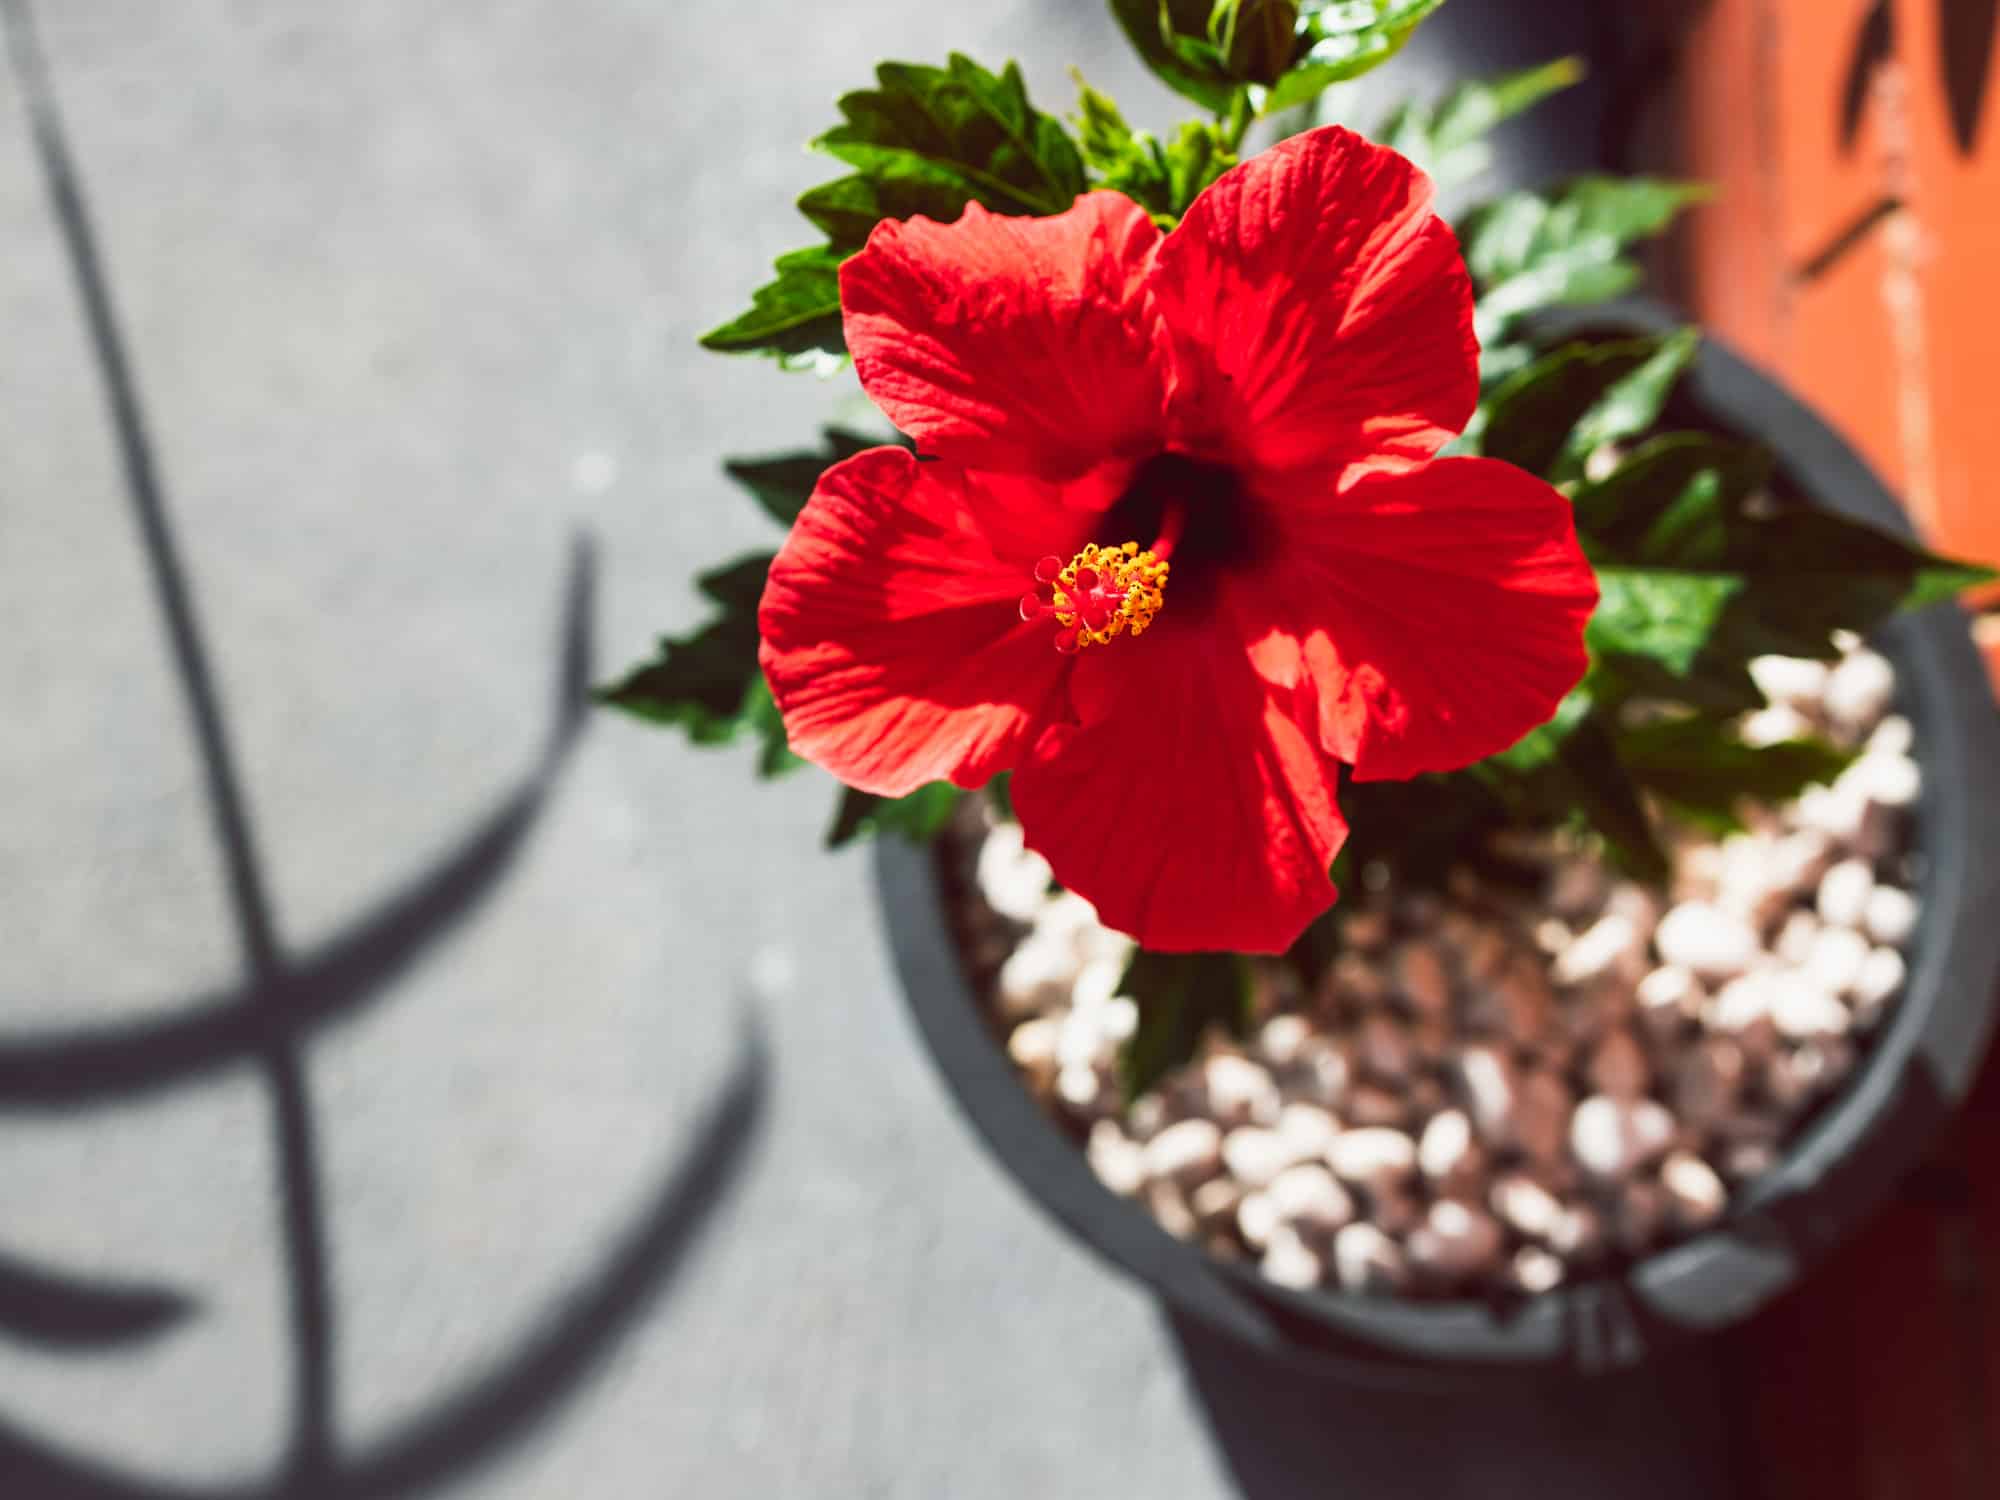 red hibiscus flower Red Tropical Hibiscus Hibiscus Hibiscus tree tropical hibiscus tree Hibiscus bush Tropical hibiscus bush yoder hibiscus yoder dwarf hibiscus Dwarf tropical hibiscus Tropical plants tropical flowers colorful flowers pet friendly plants pollinator friendly plants Live plants shop live plants online plant shop